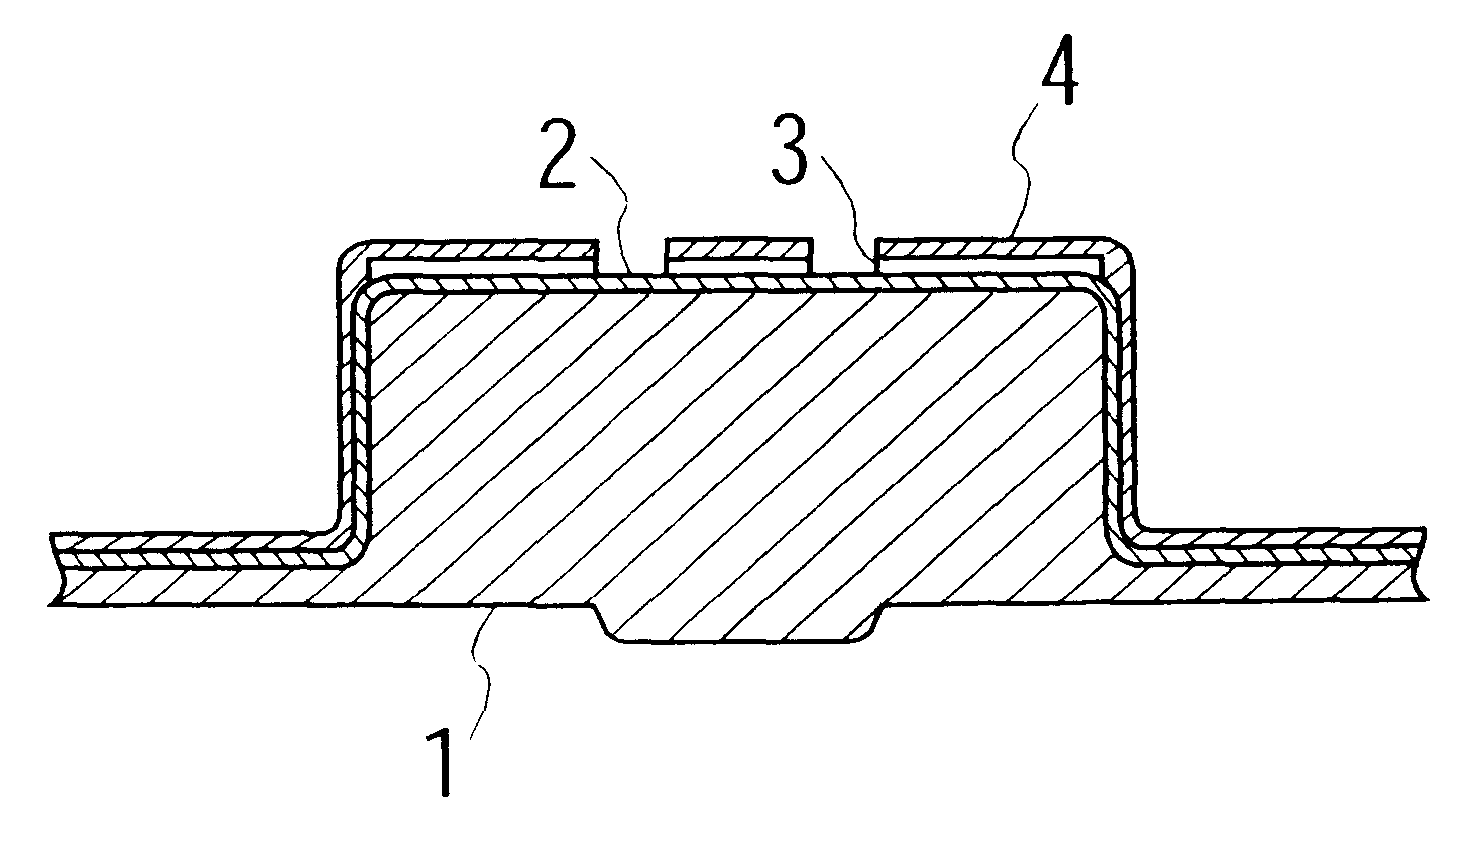 Manufacturing method of color keypad for a contact of character illumination rubber switch